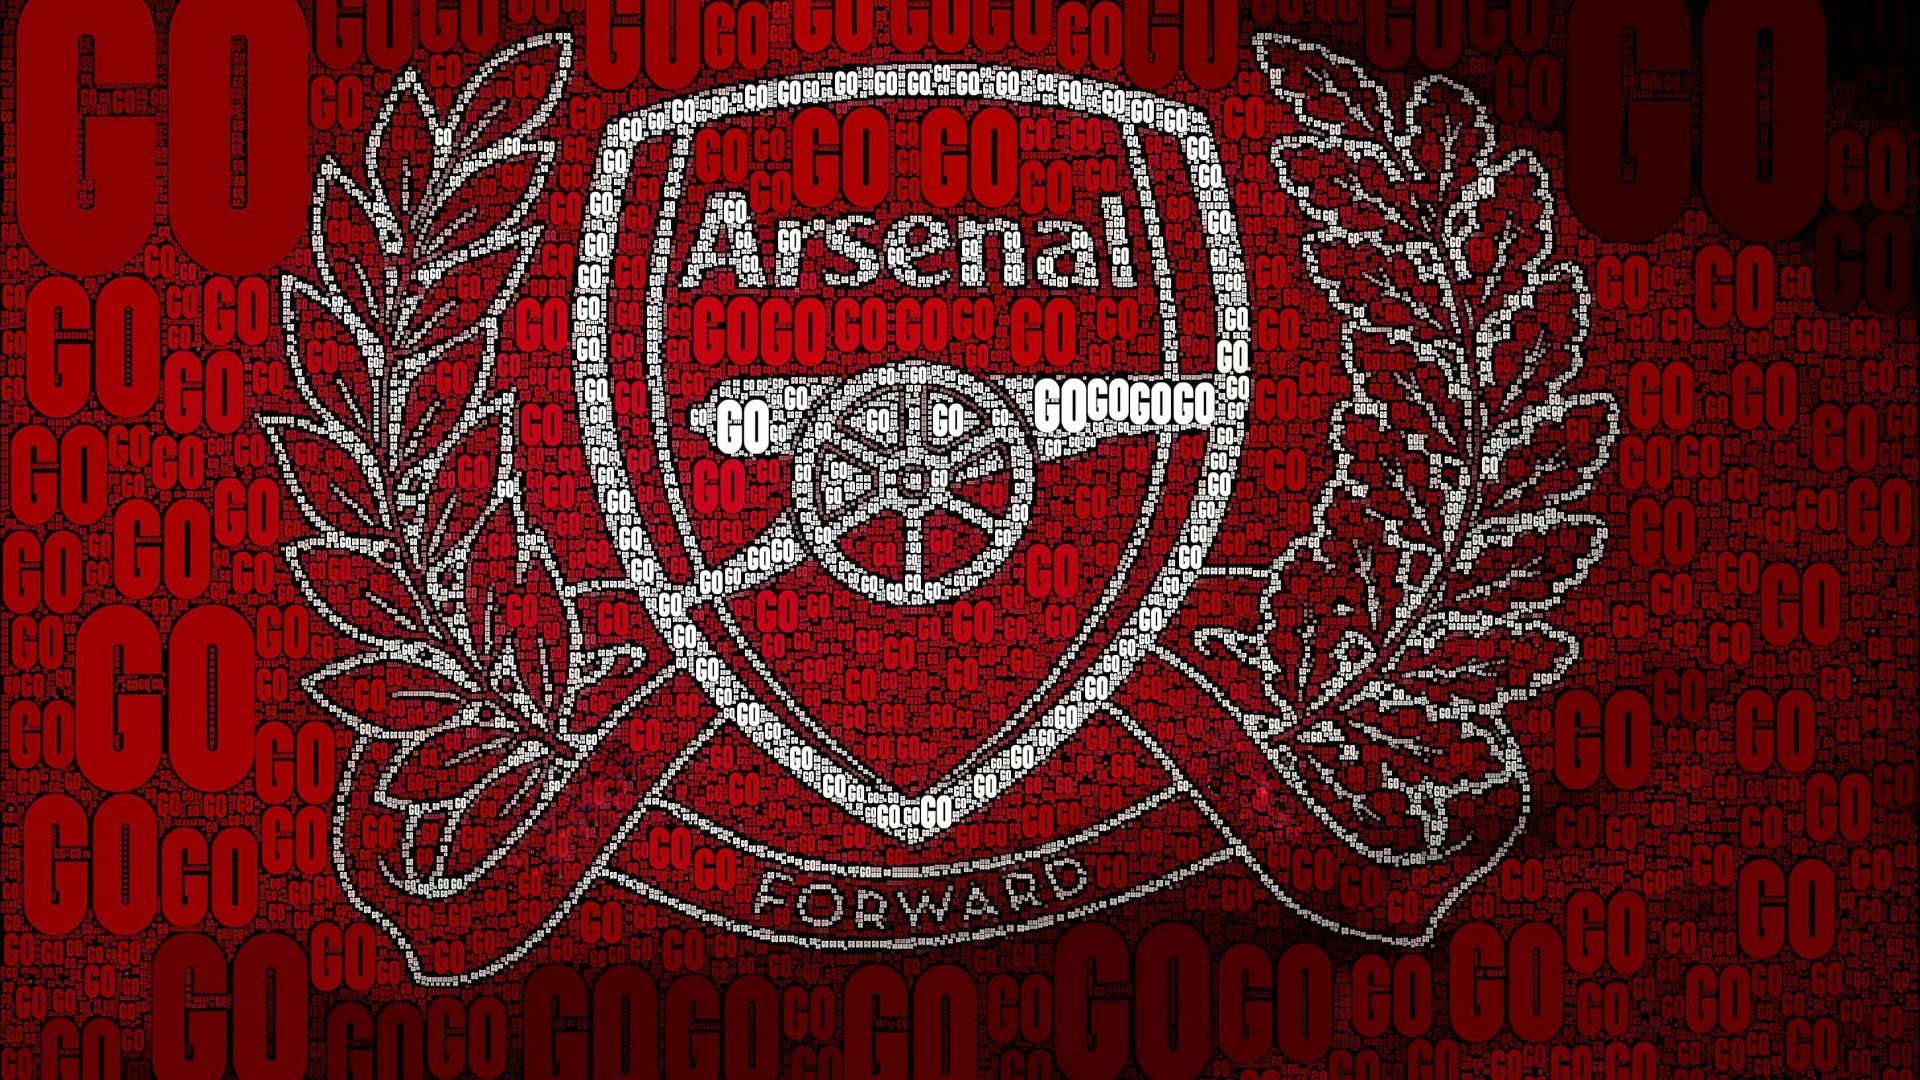 HD Arsenal Football Club Wallpapers With high-resolution 1920X1080 pixel. You can use this wallpaper for your Desktop Computers, Mac Screensavers, Windows Backgrounds, iPhone Wallpapers, Tablet or Android Lock screen and another Mobile device